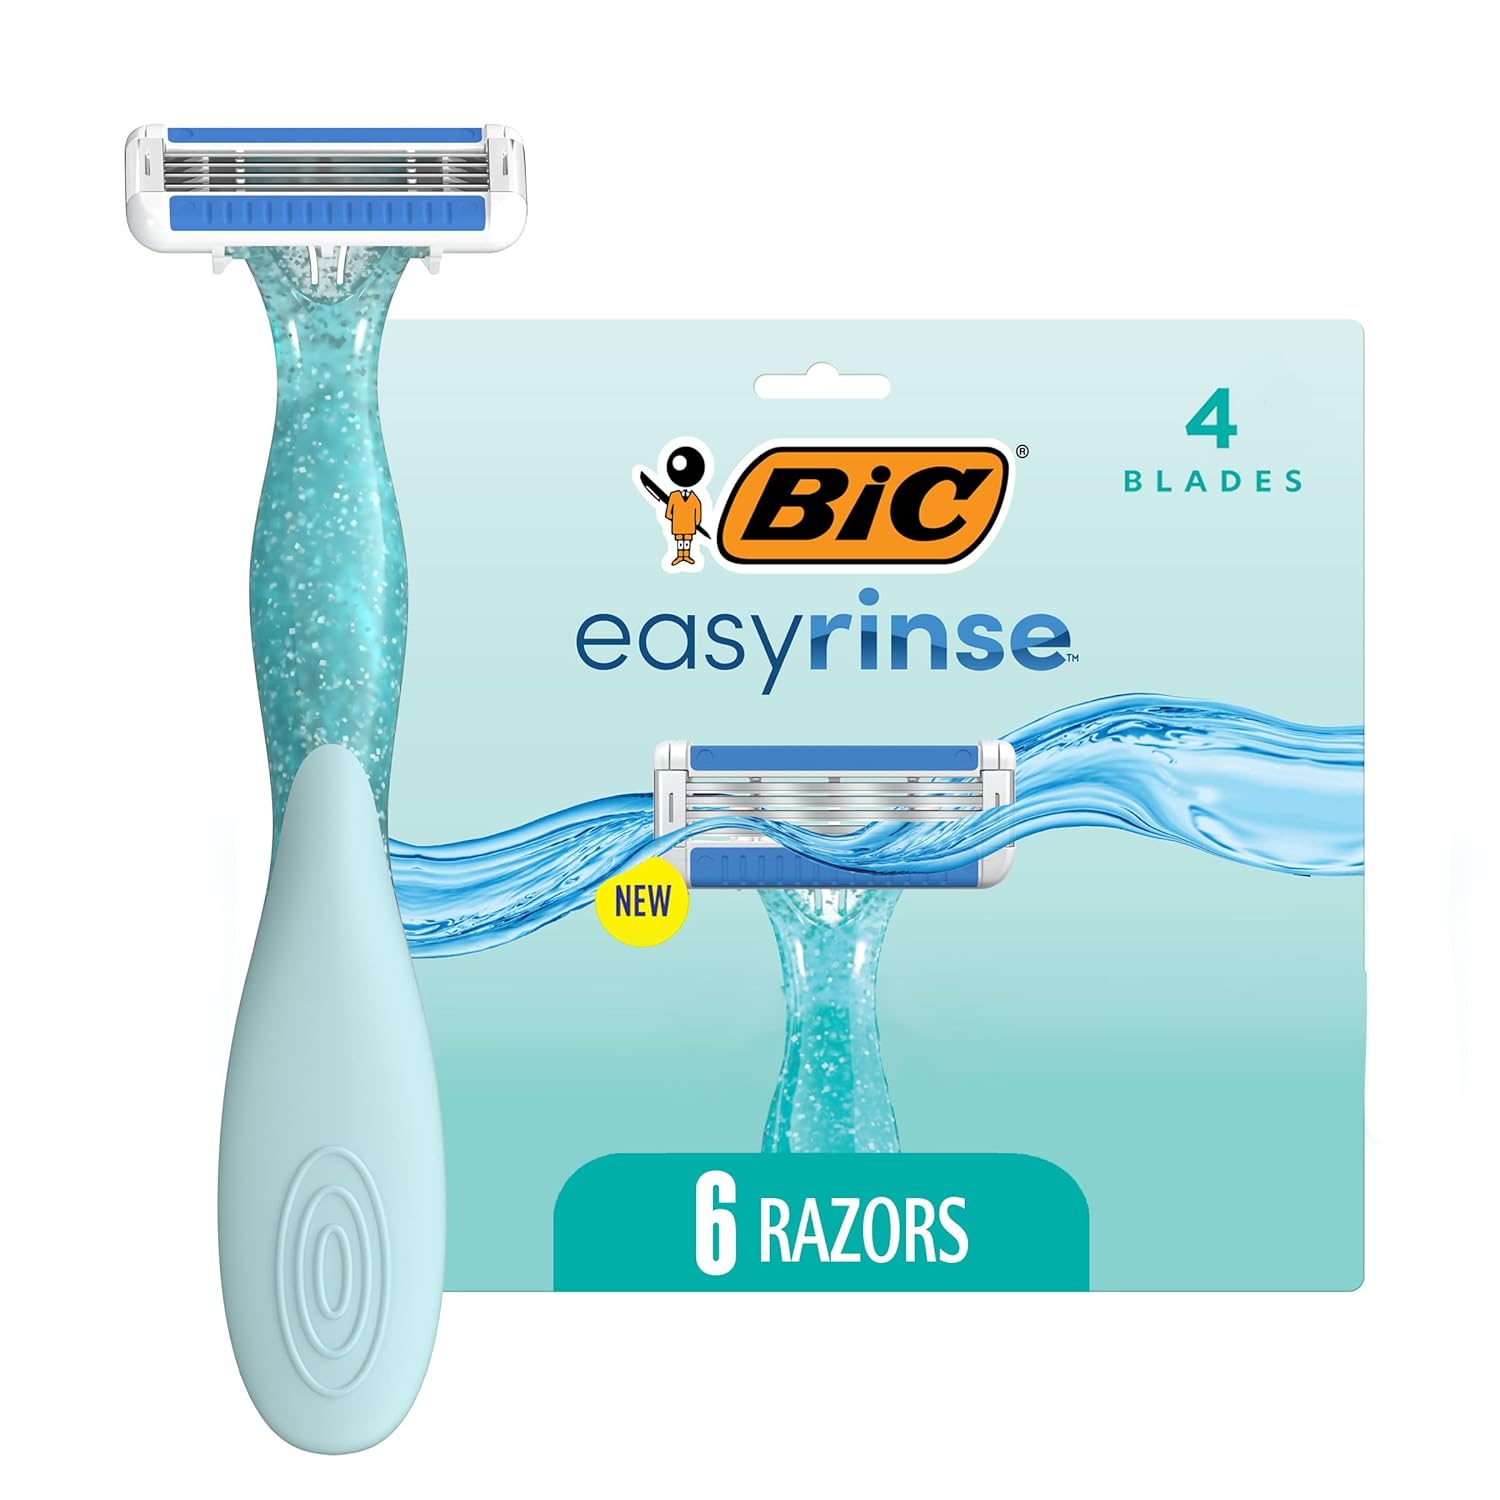 BIC EasyRinse Anti-Clogging Women' Disposable Razors for a Smoother Shave With Less Irritation*, Easy Rinse Shaving Razors With 4 Blades, 6 Count